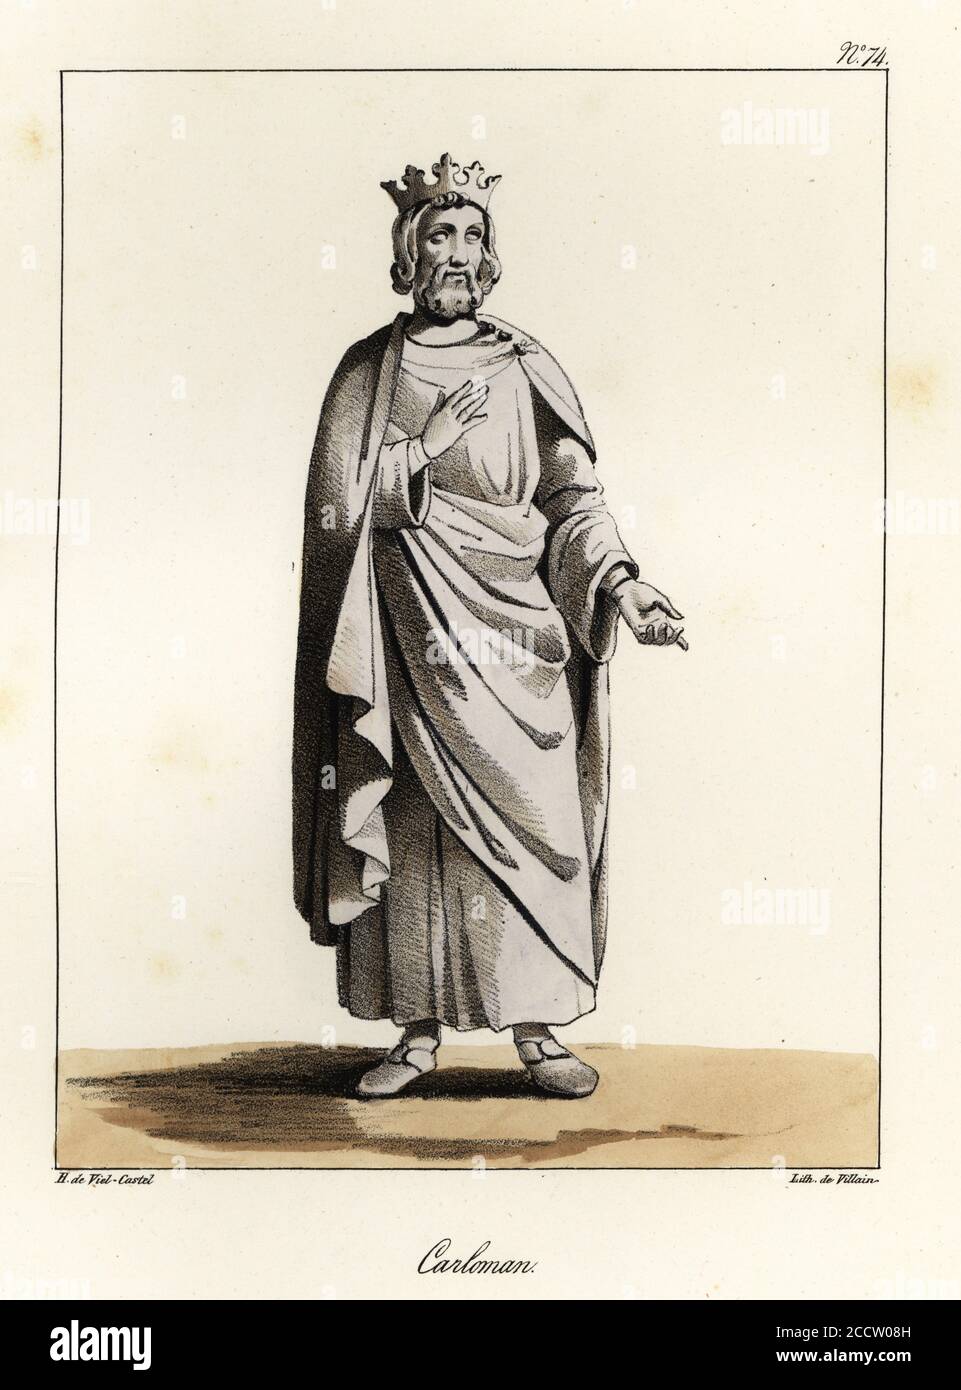 Statue of Carloman I, King of the Franks, younger brother of Charlemagne, 751-771. Tinted lithograph by Villain after an illustration by Horace de Viel-Castel from his Collection des costumes, armes et meubles pour servir à l'histoire de la France (Collection of costumes, weapons and furniture to be used in the history of France), Treuttel & Wurtz, Bossange, 1827. Stock Photo